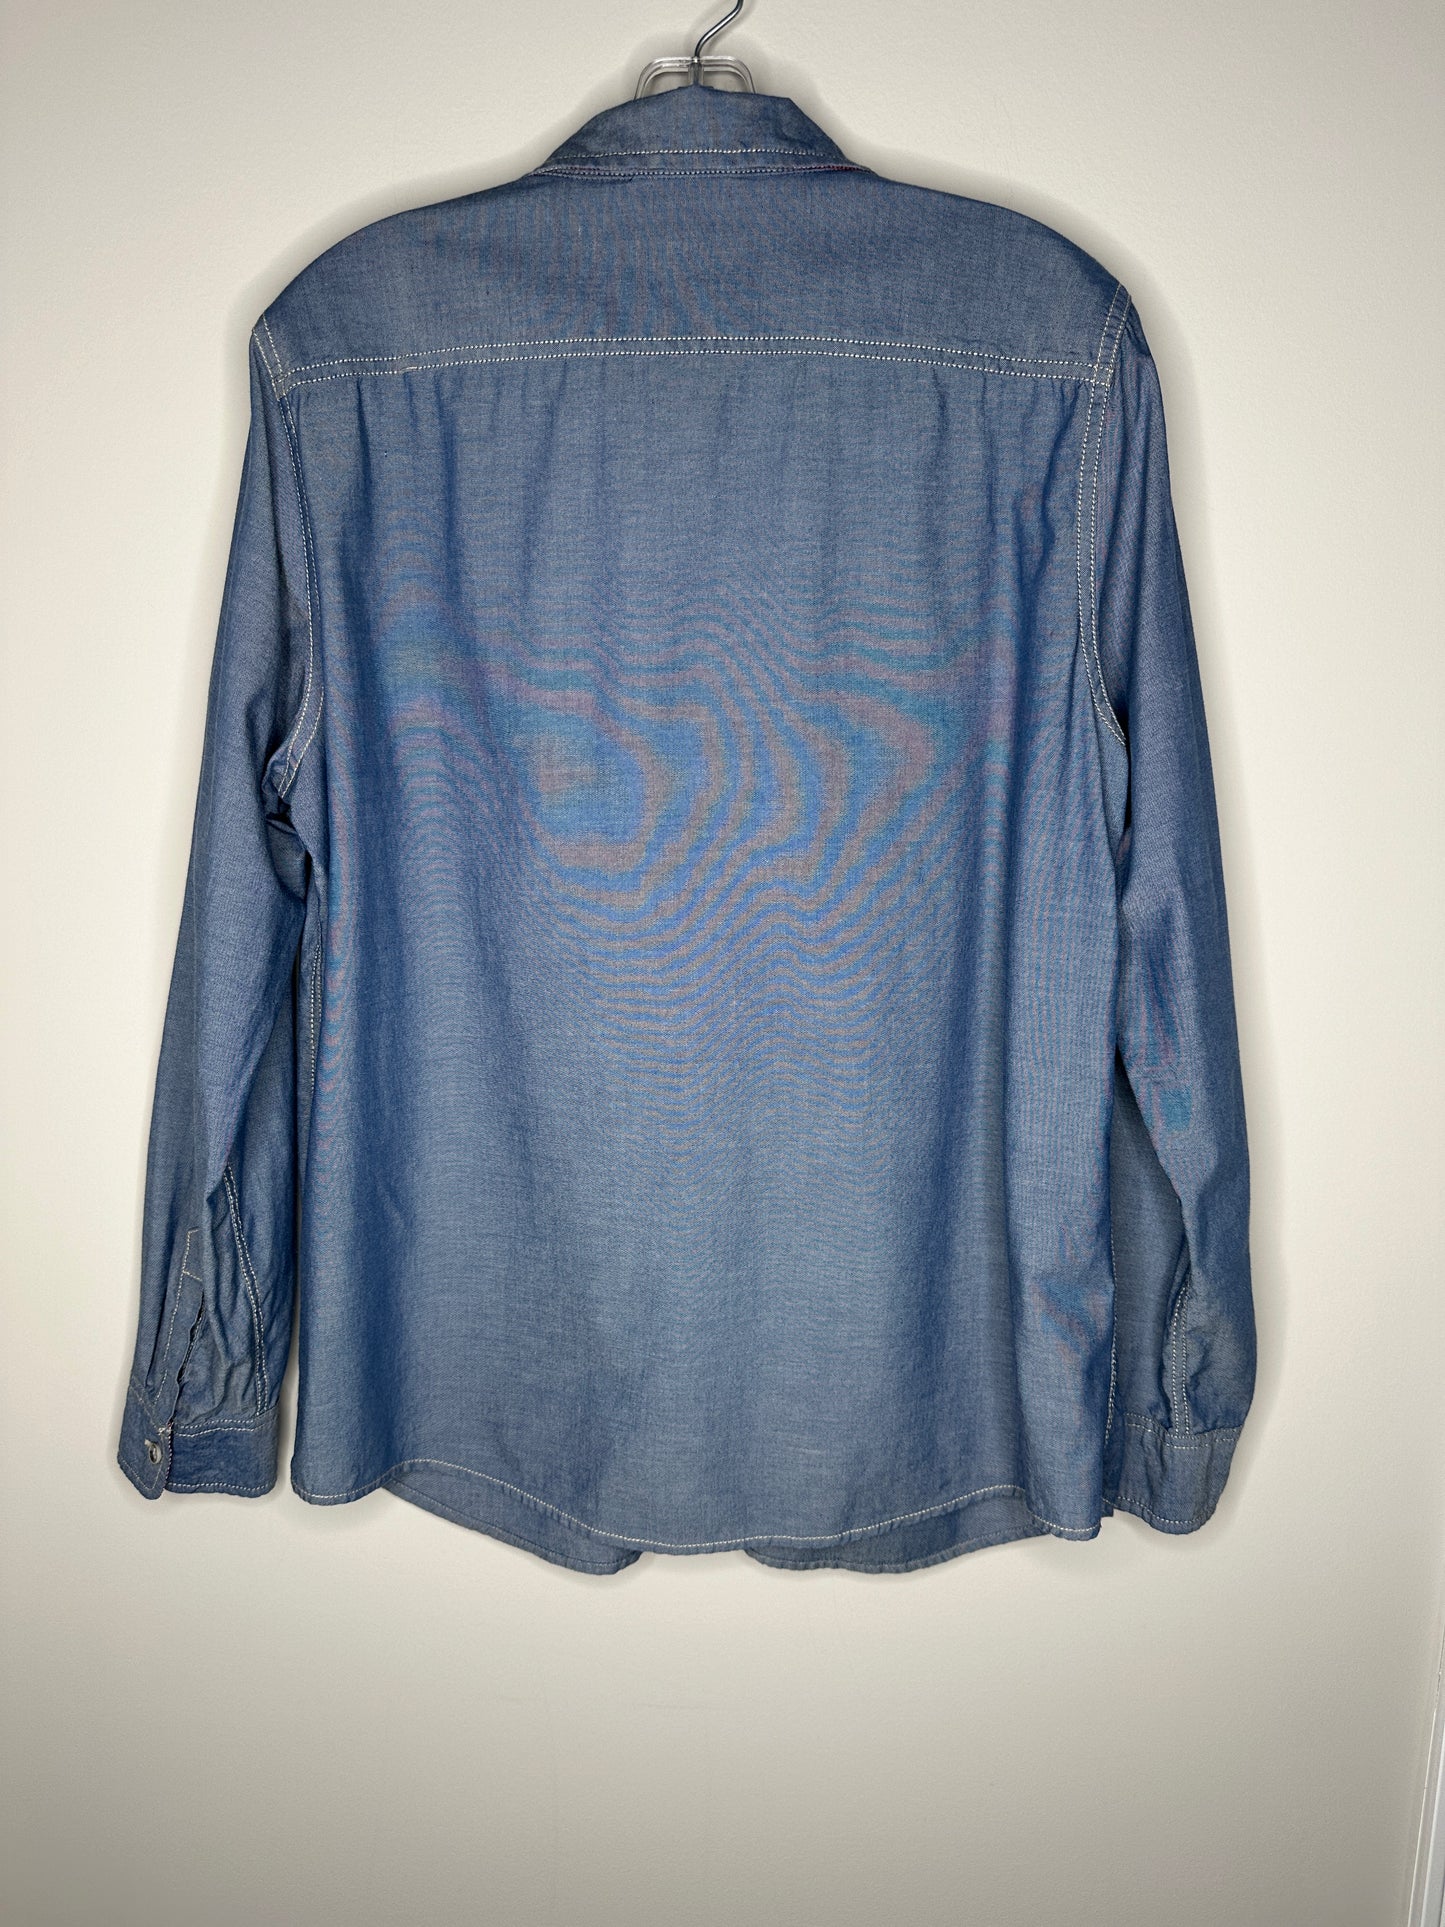 Weatherproof Vintage Size L Blue Chambray "Indeed Brewing" Long Sleeve Shirt